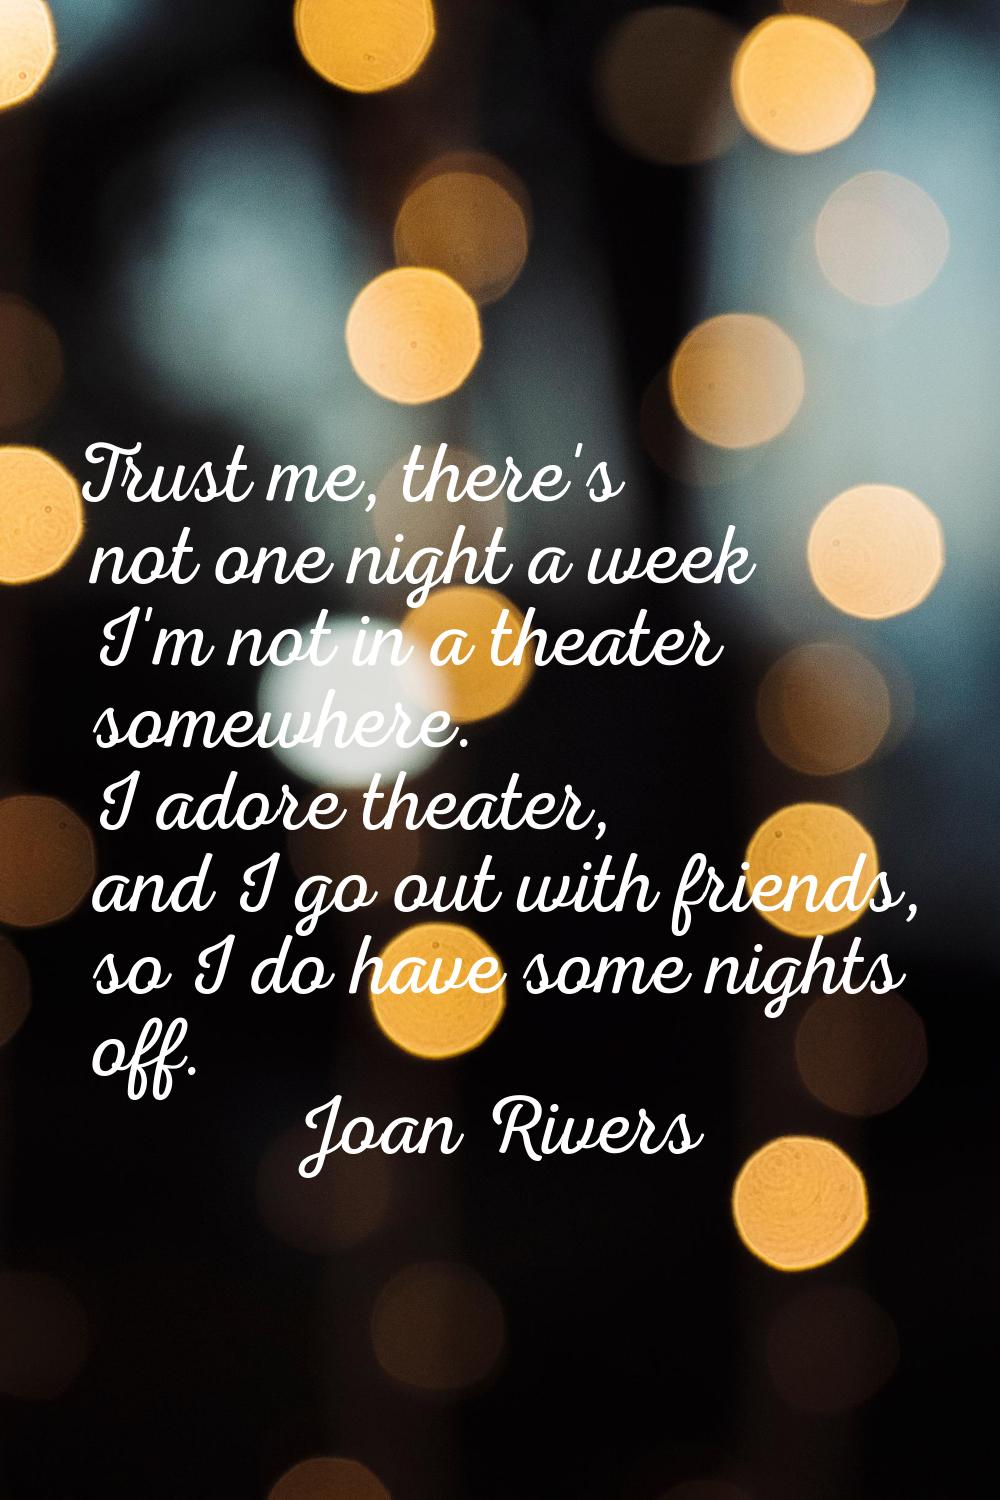 Trust me, there's not one night a week I'm not in a theater somewhere. I adore theater, and I go ou